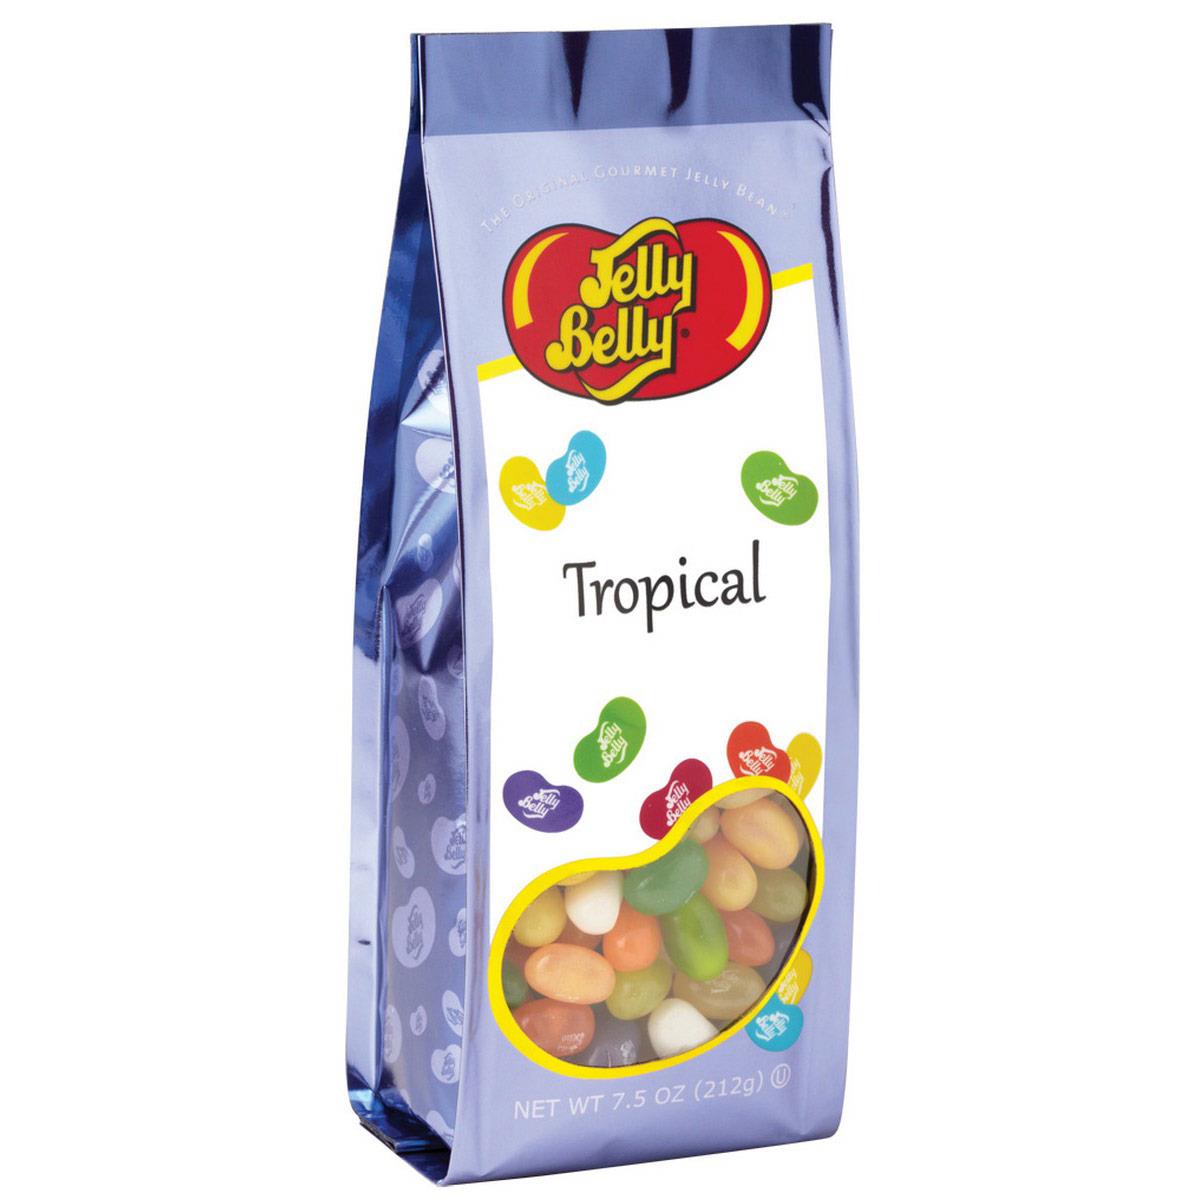 Jelly Belly Tropical Mix Jelly Beans - 7.5oz